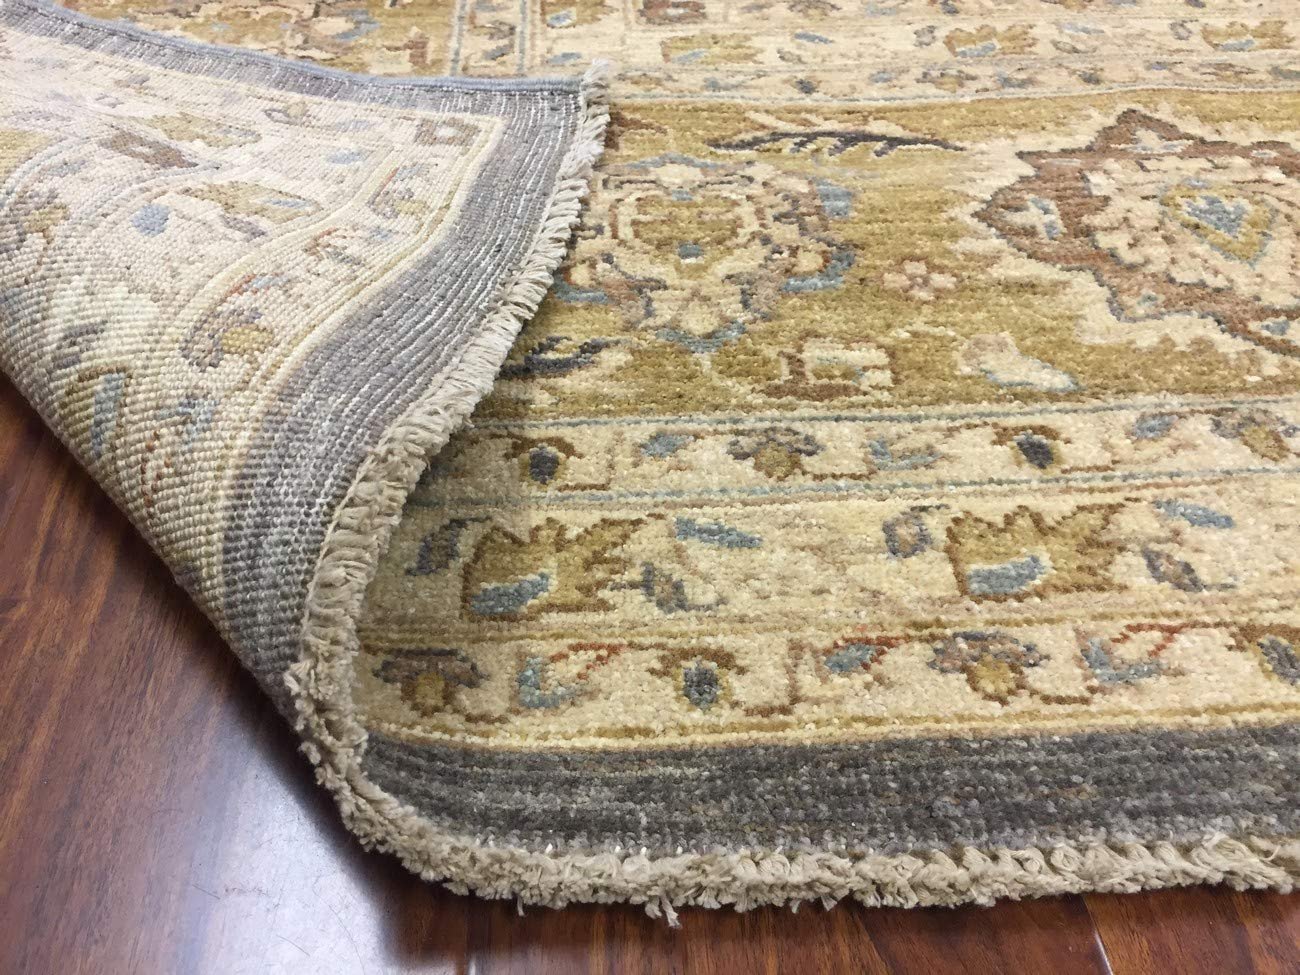 Authentic Hand-Knotted Pakistani Rug-Allover Floral-Olive/Gray-(11.10 by 14.9 Feet)